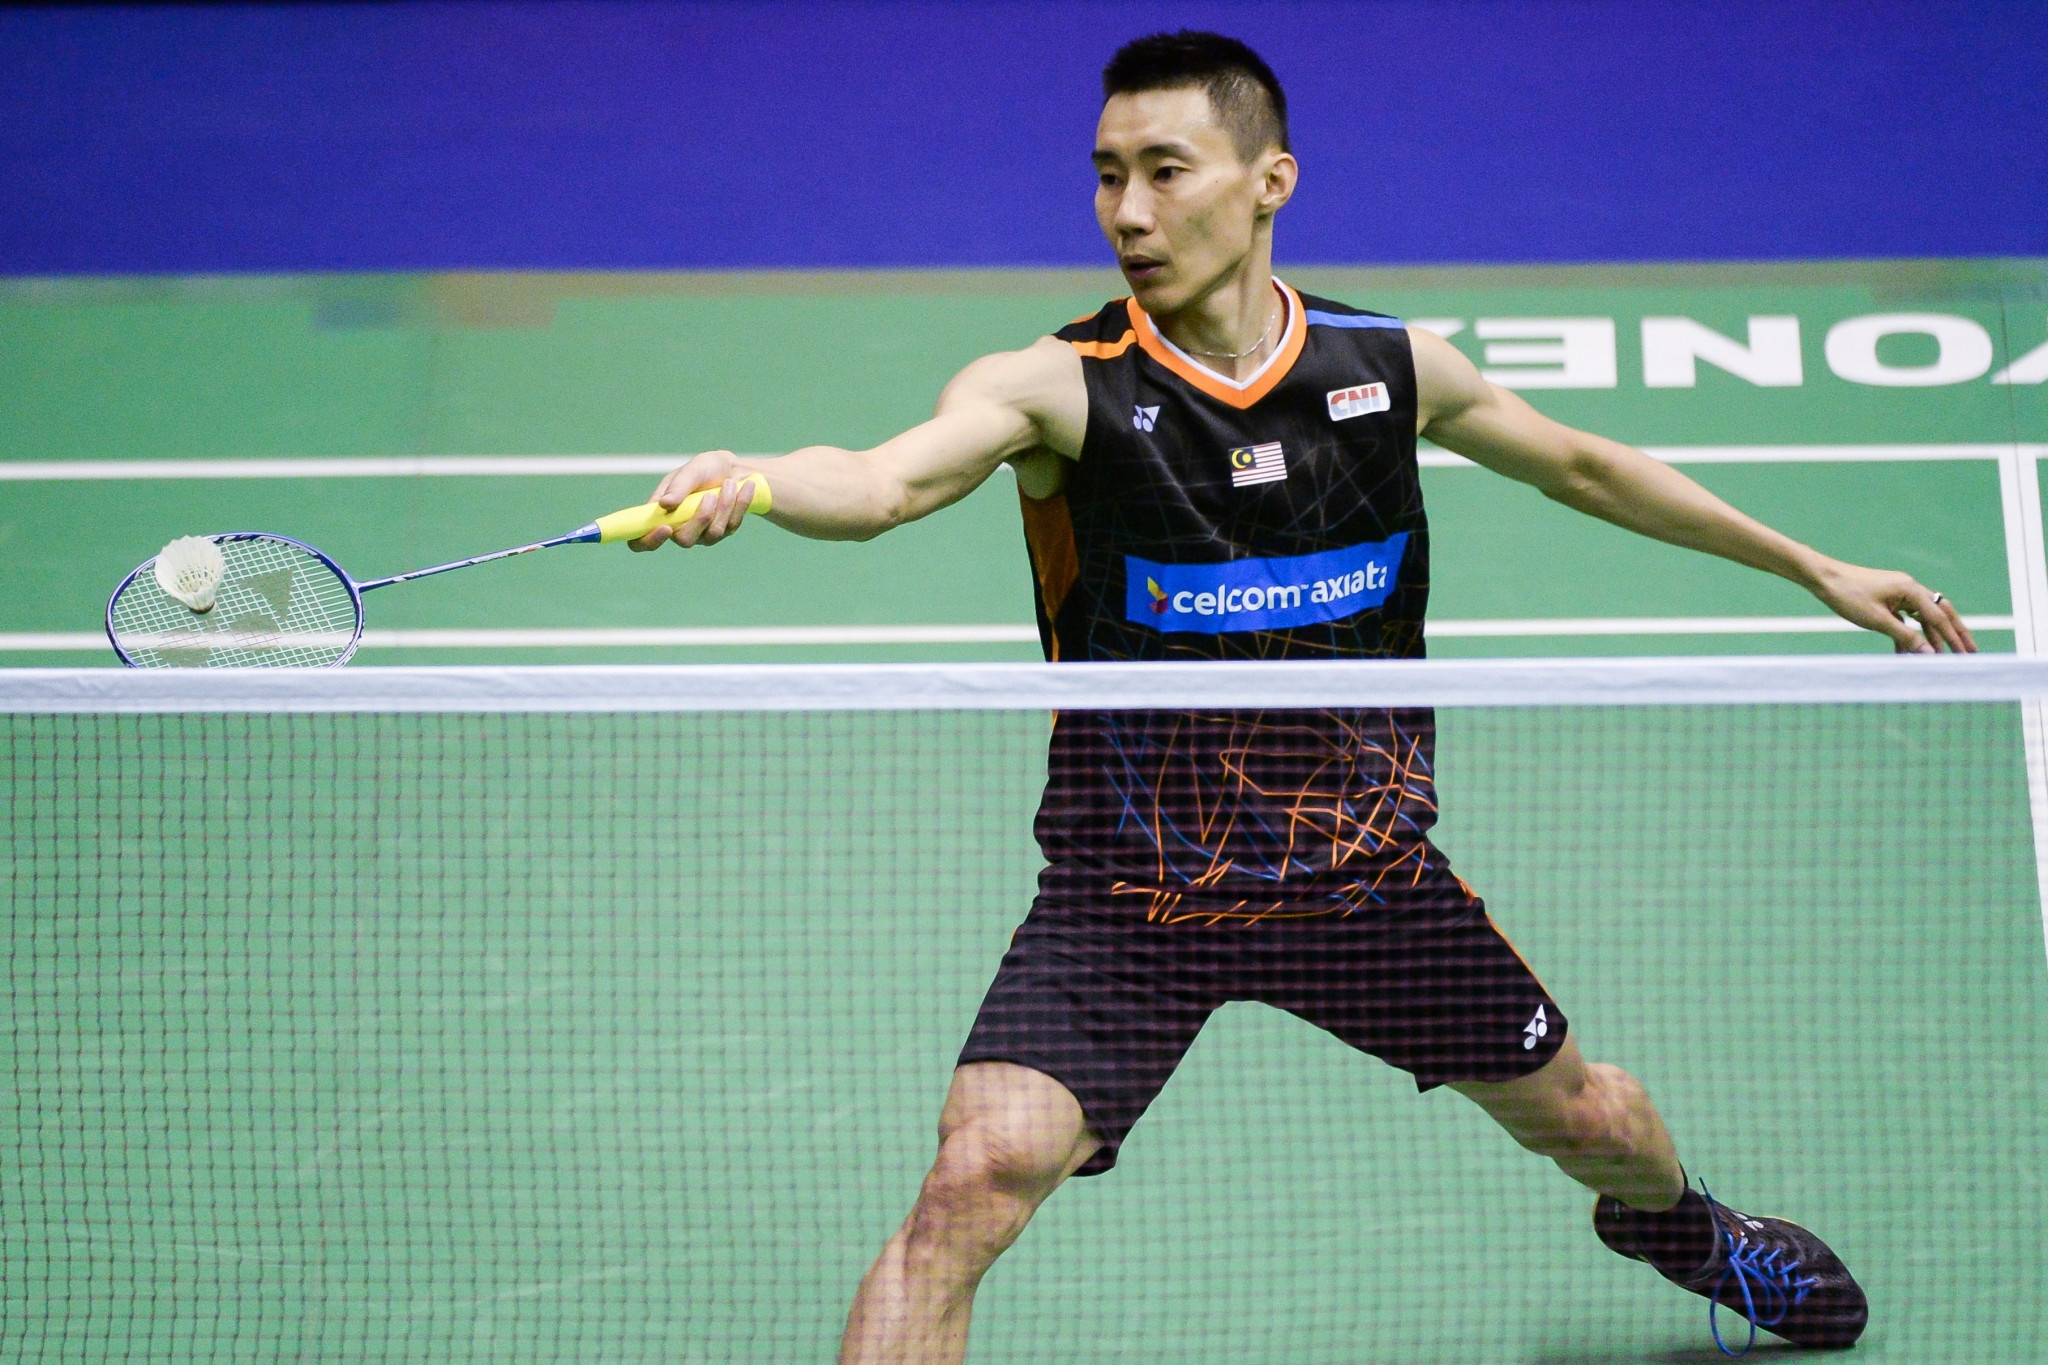 Olympic gold medal rematch headlines group stage draw for BWF World Superseries Finals